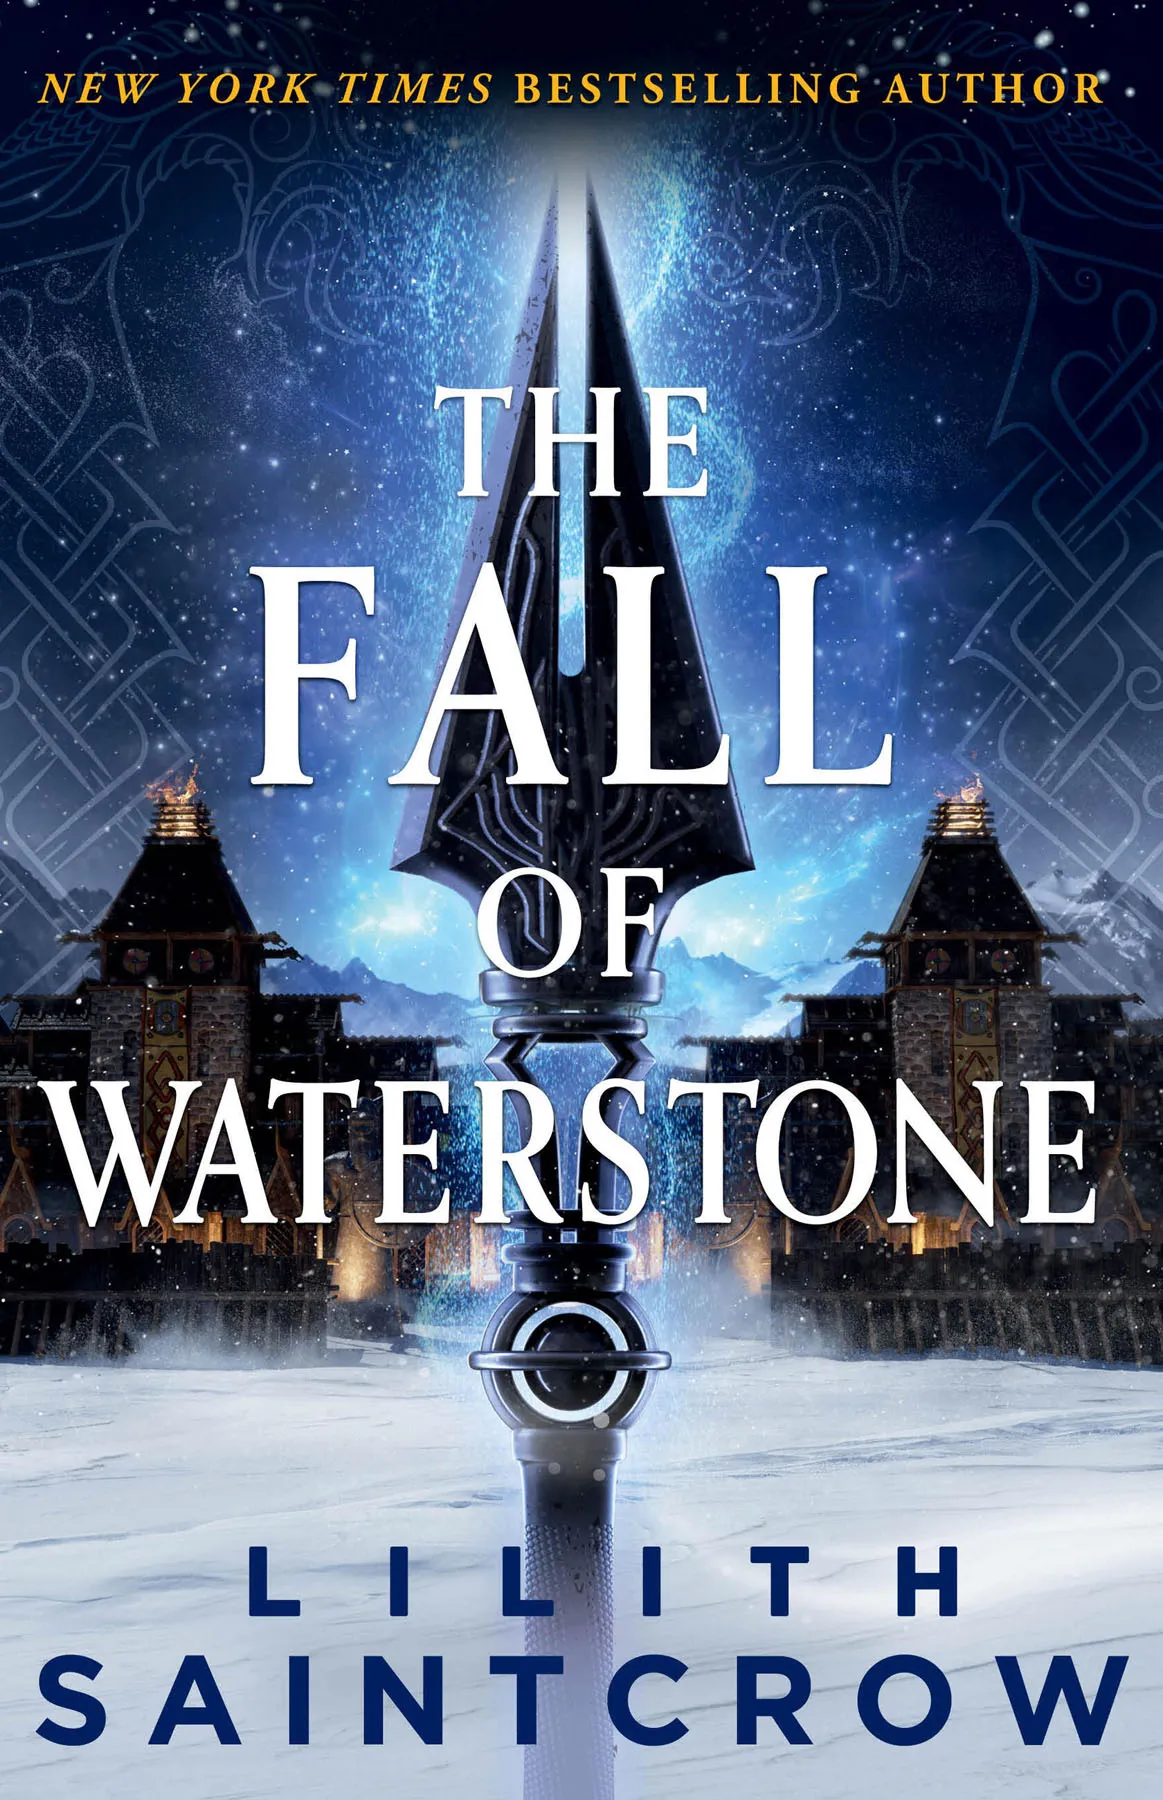 The Fall of Waterstone (Black Land's Bane #2)